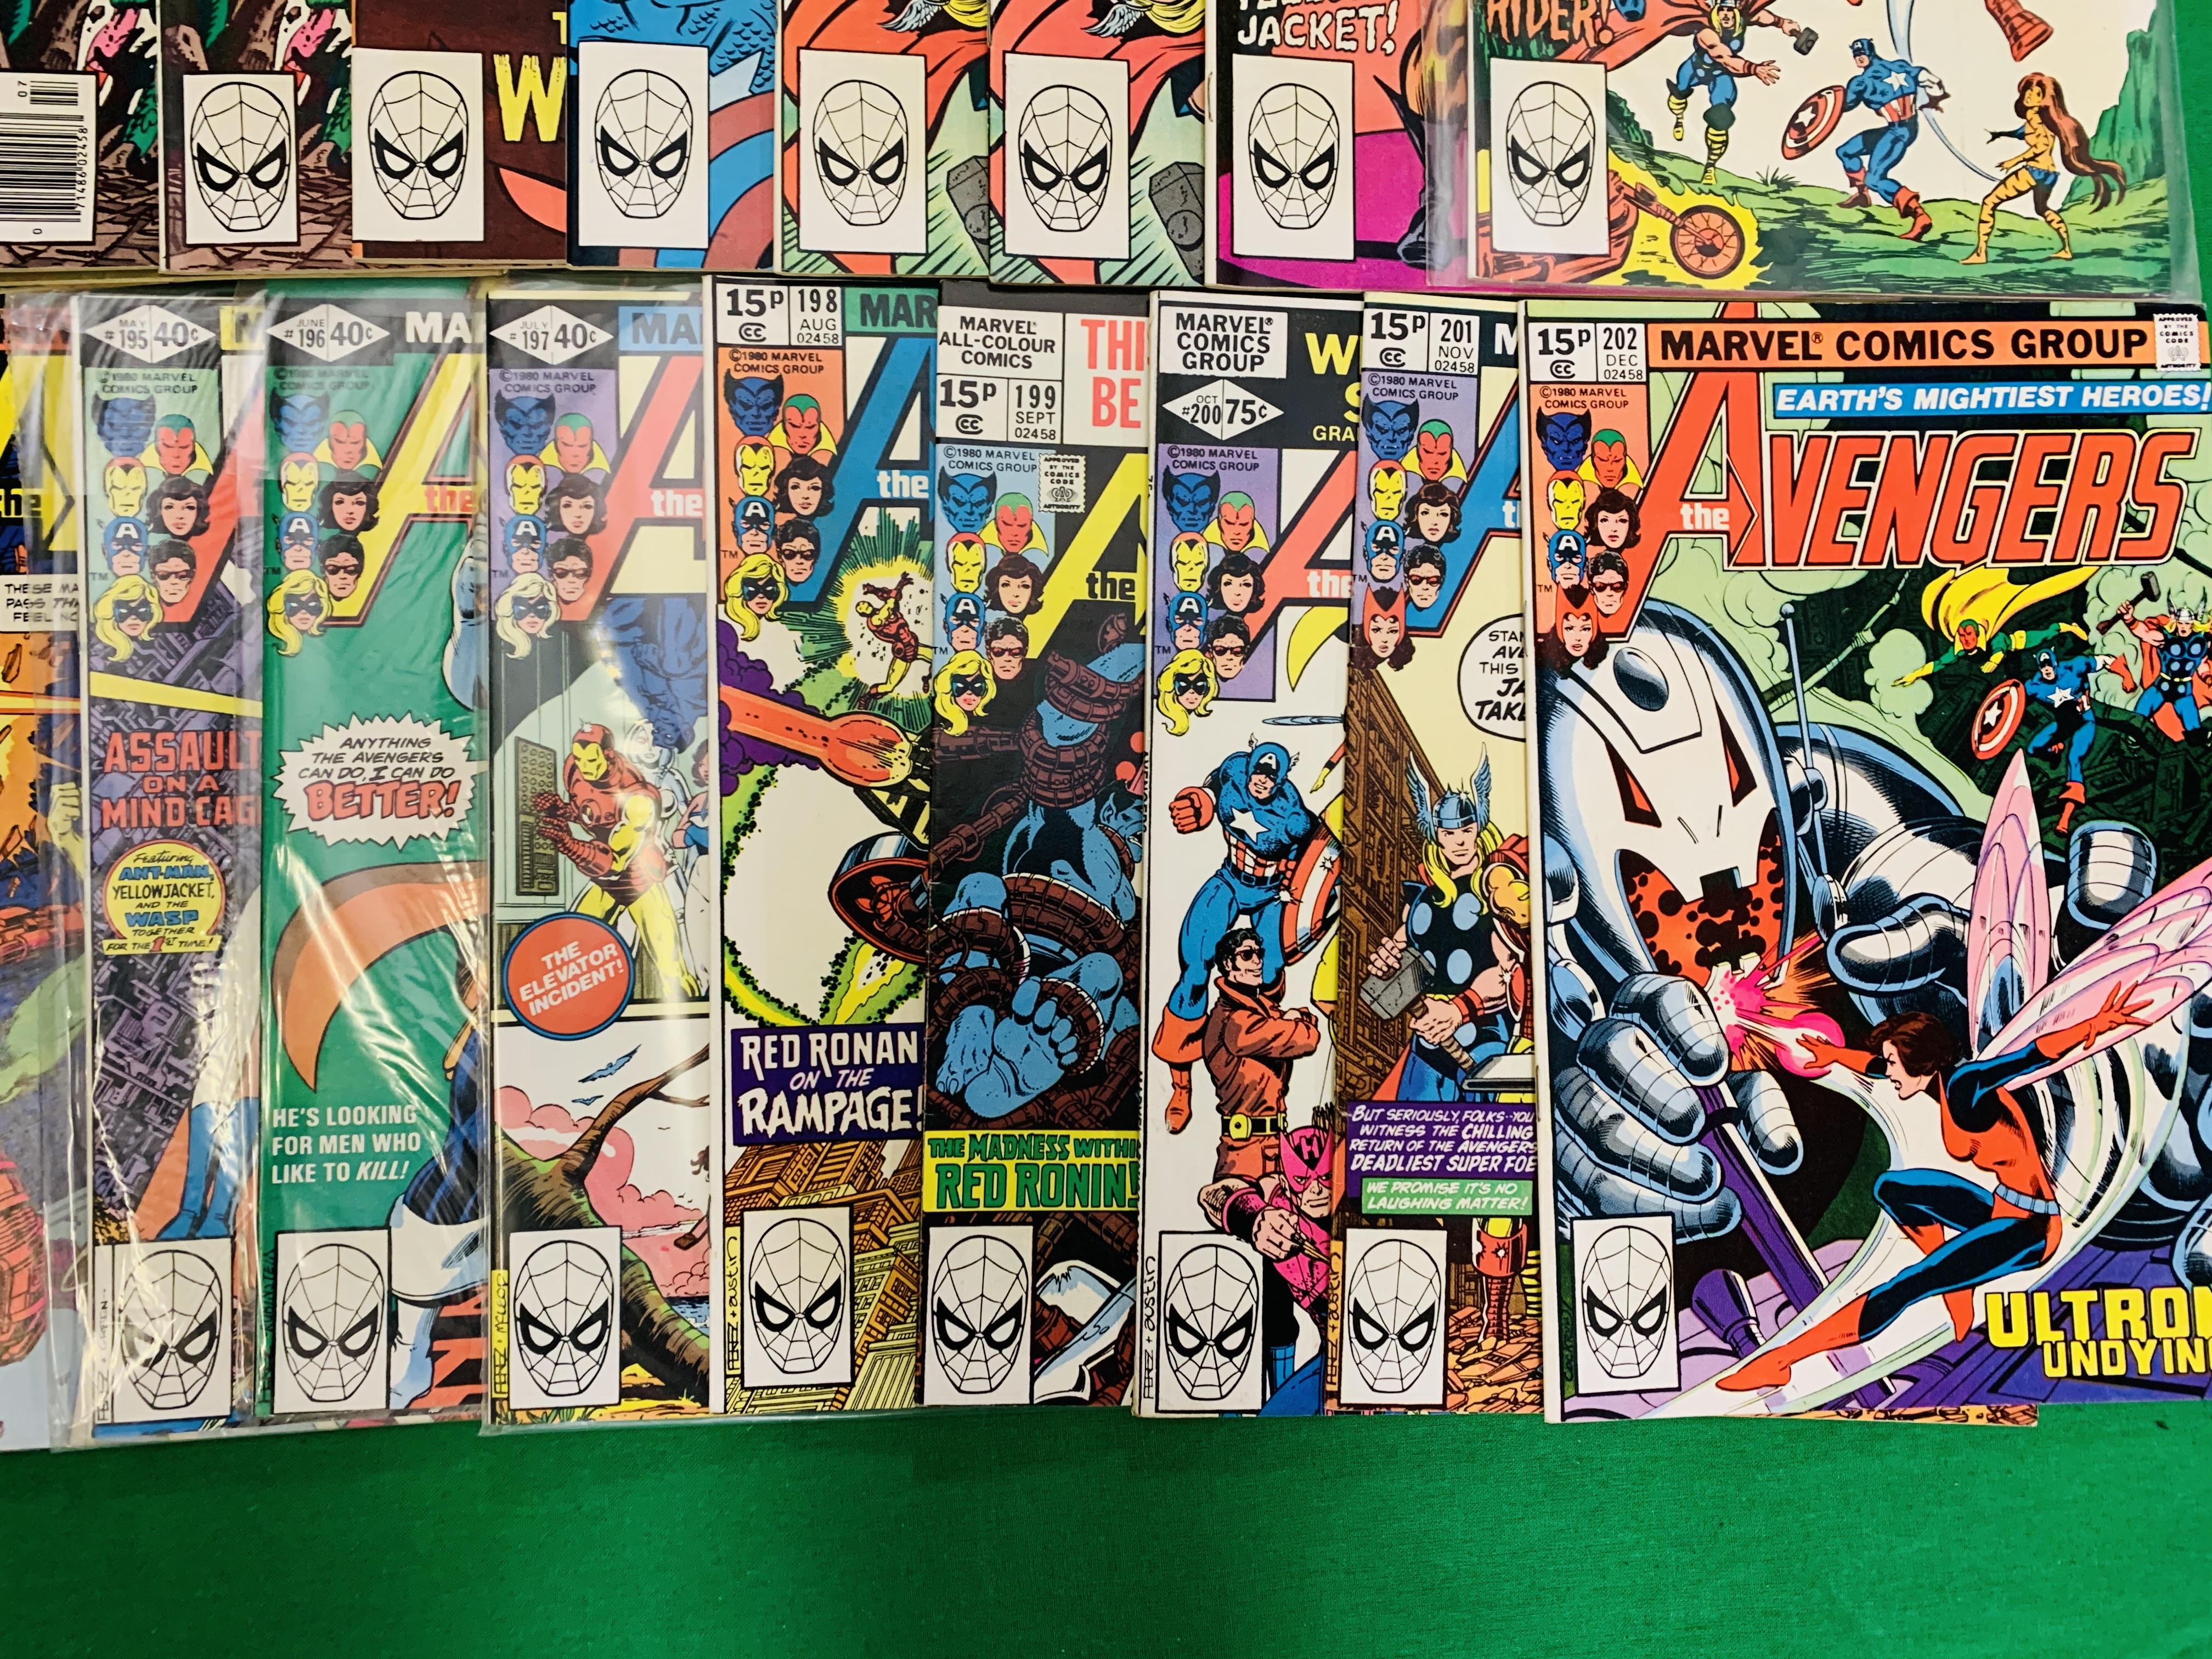 MARVEL COMICS THE AVENGERS NO. 101 - 299, MISSING ISSUES 103 AND 110. - Image 106 of 130